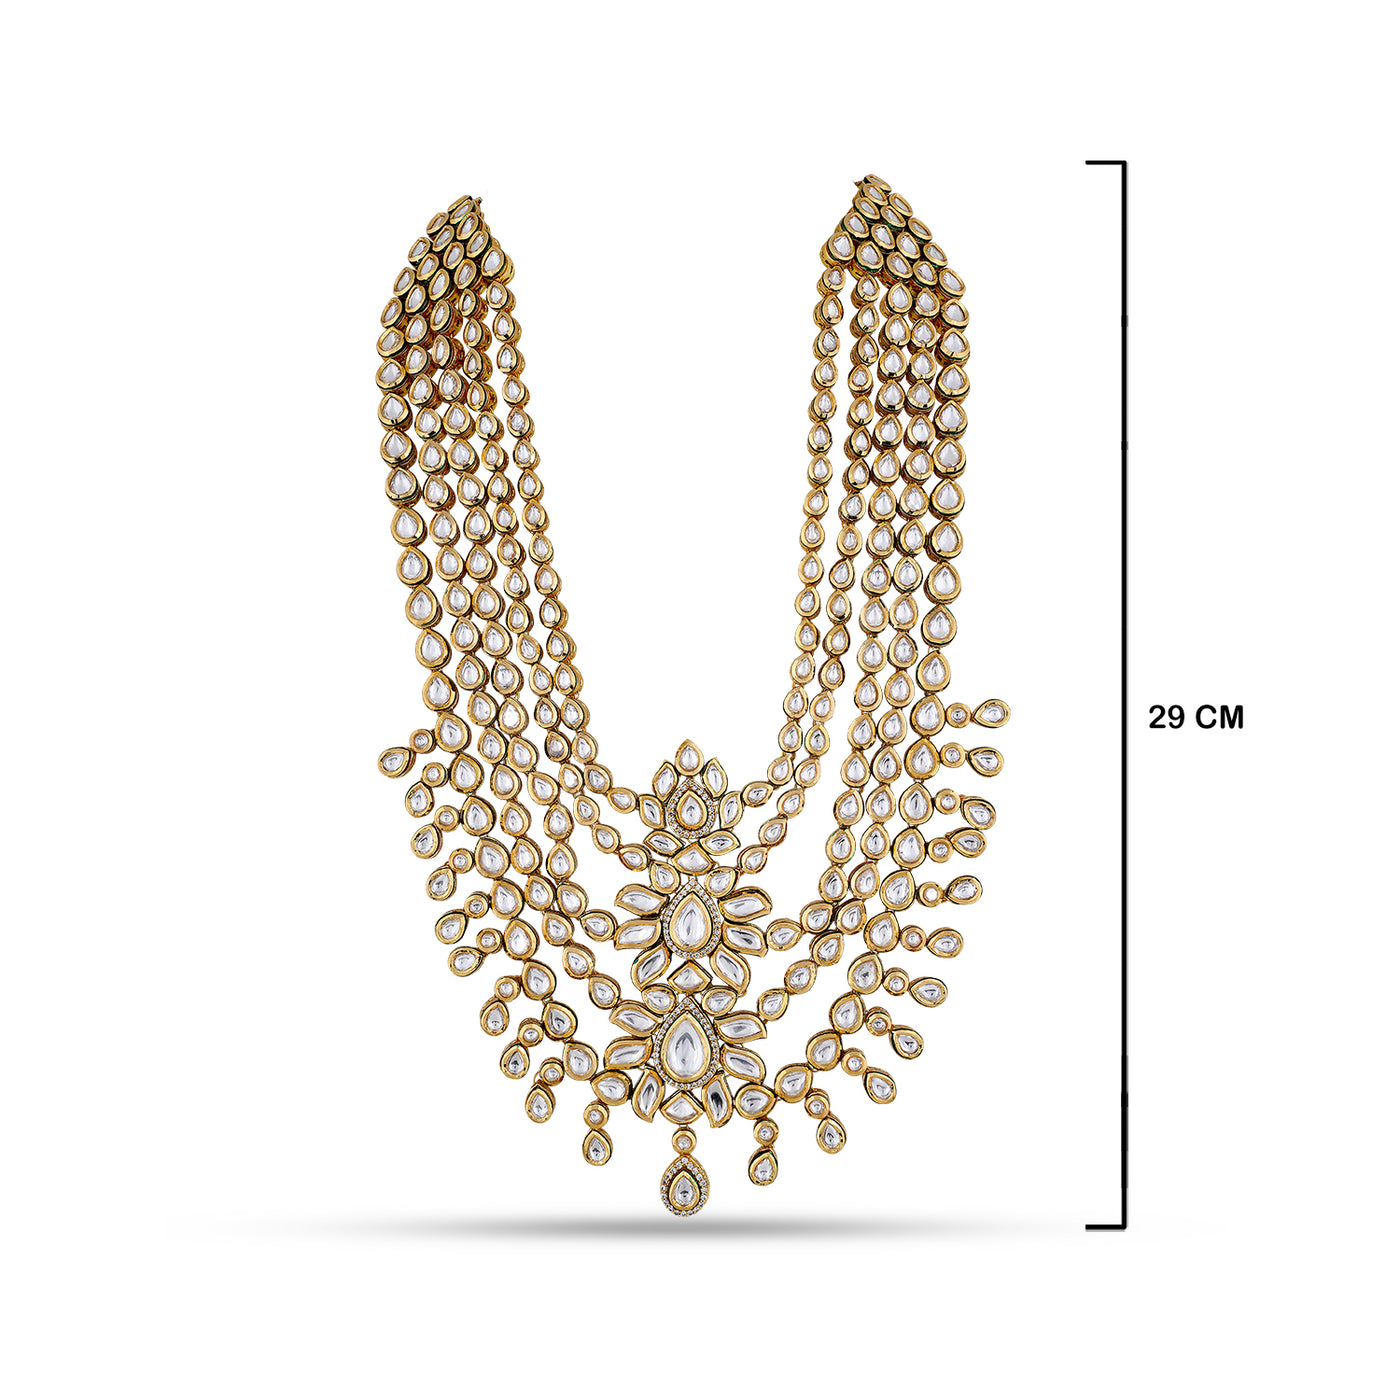 Kundan Studded Necklace with measurements in cm. 29cm.